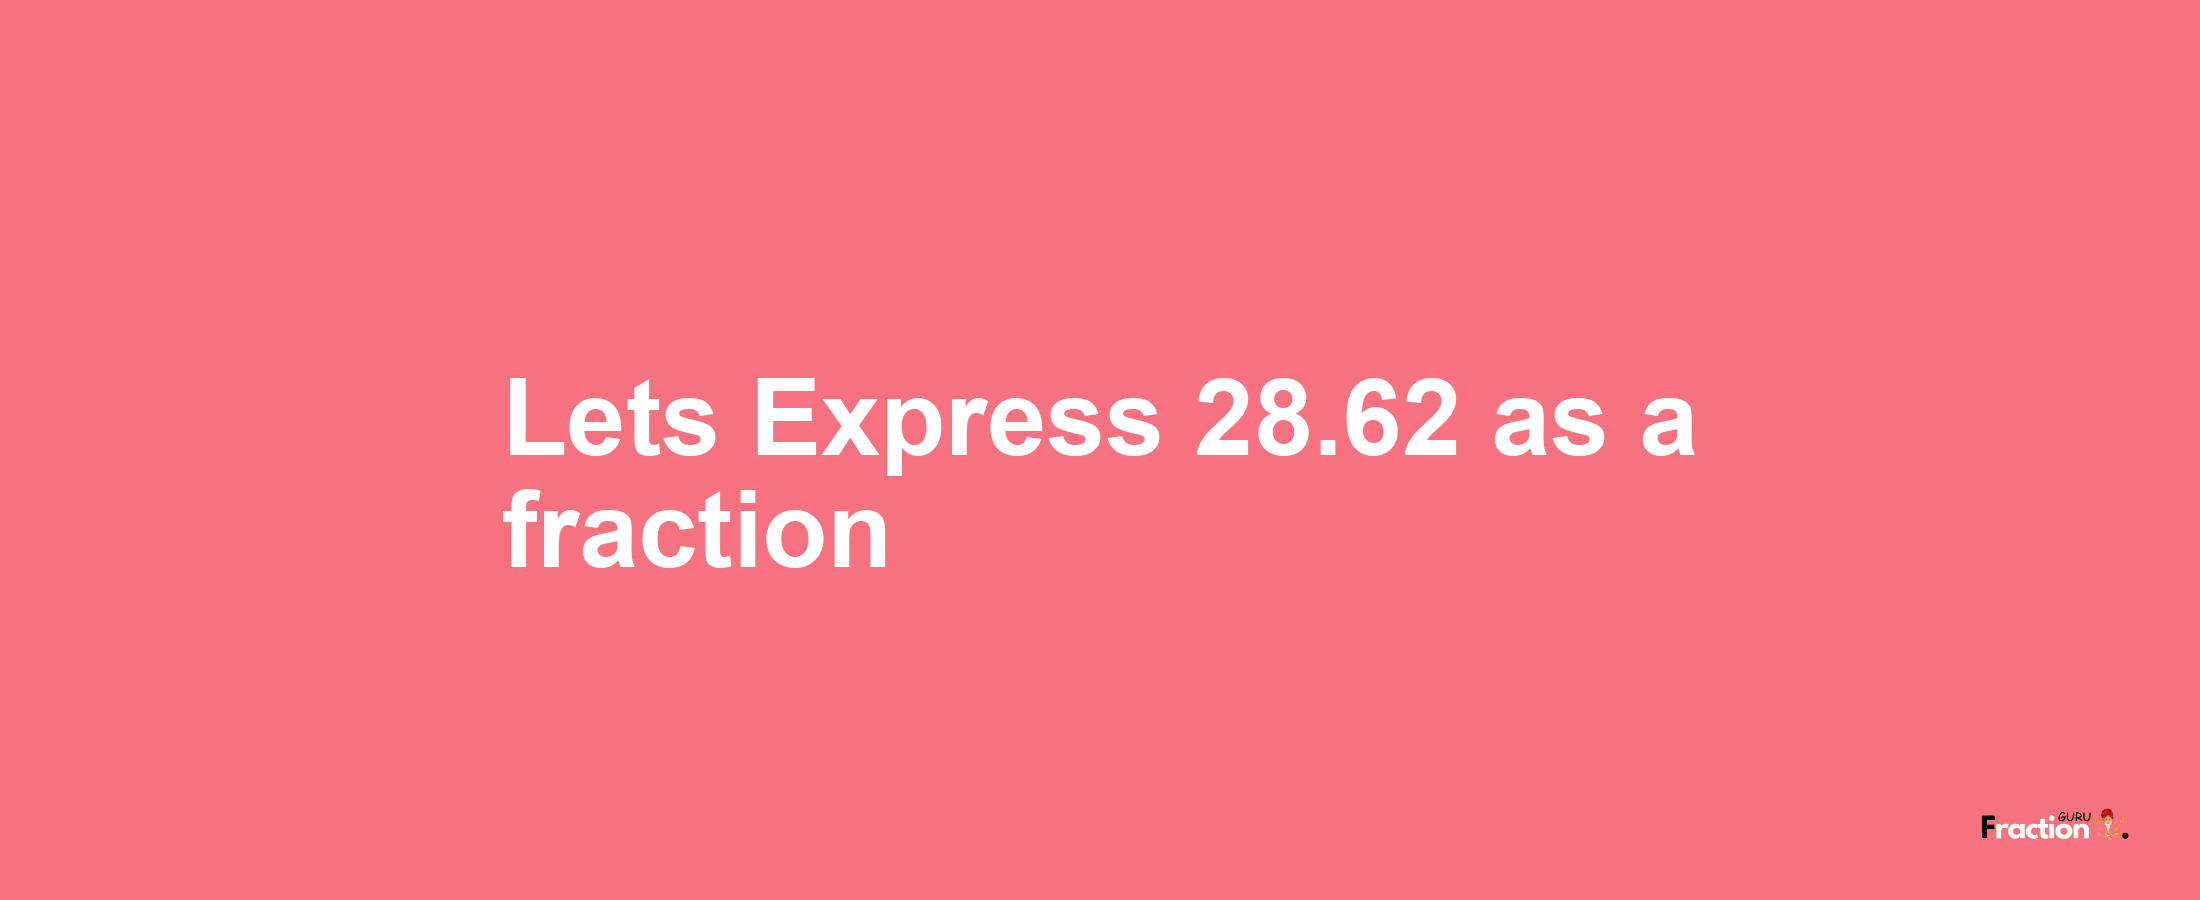 Lets Express 28.62 as afraction